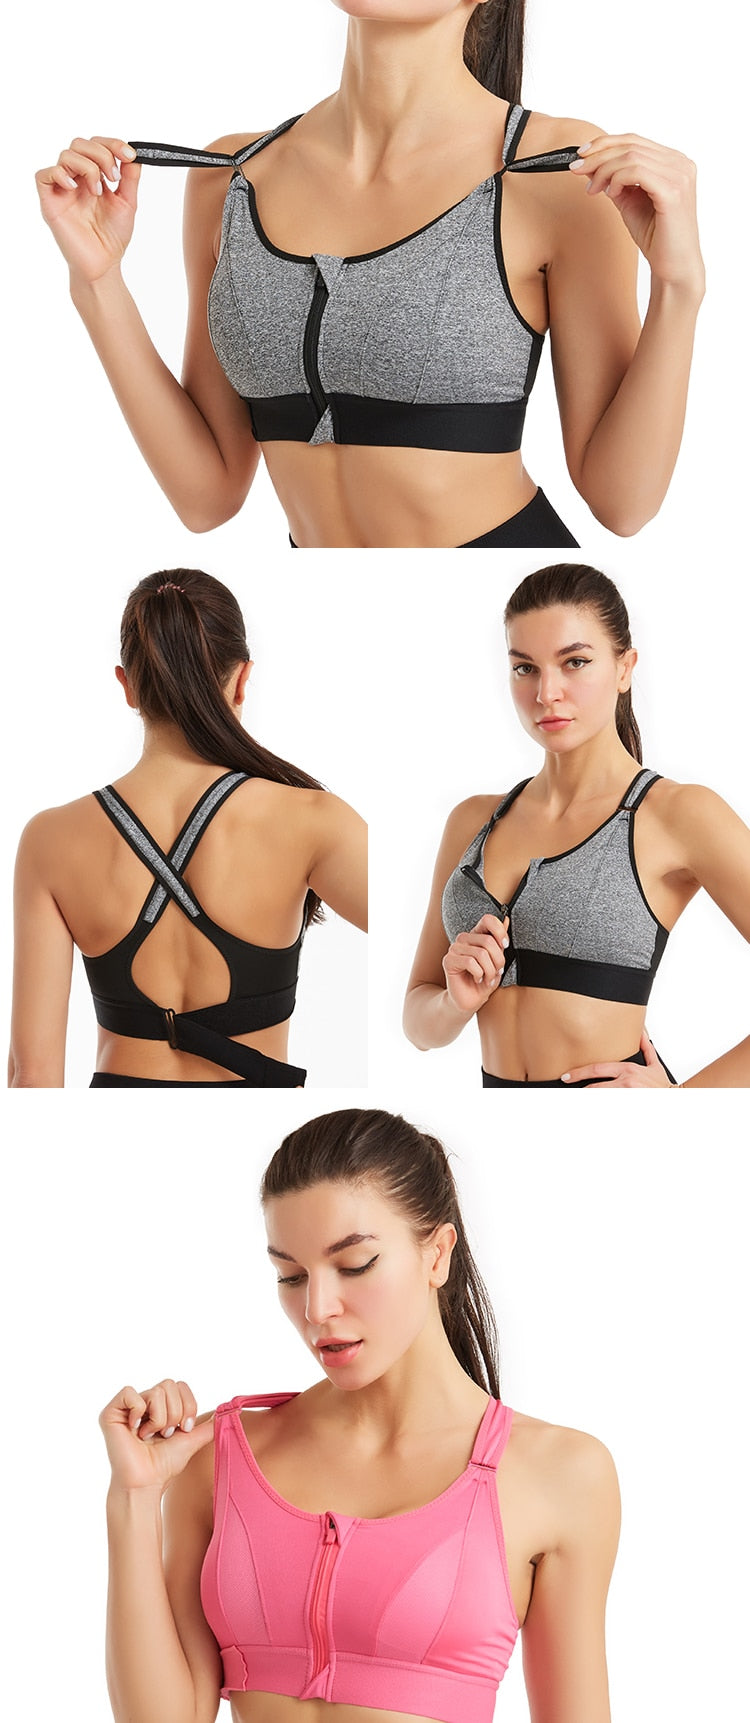 Sports Bra Women's Tube Top Bralette Underwear Gym Without Bones Active Plus Size Invisible Seamless Fitness Bra Top The Clothing Company Sydney